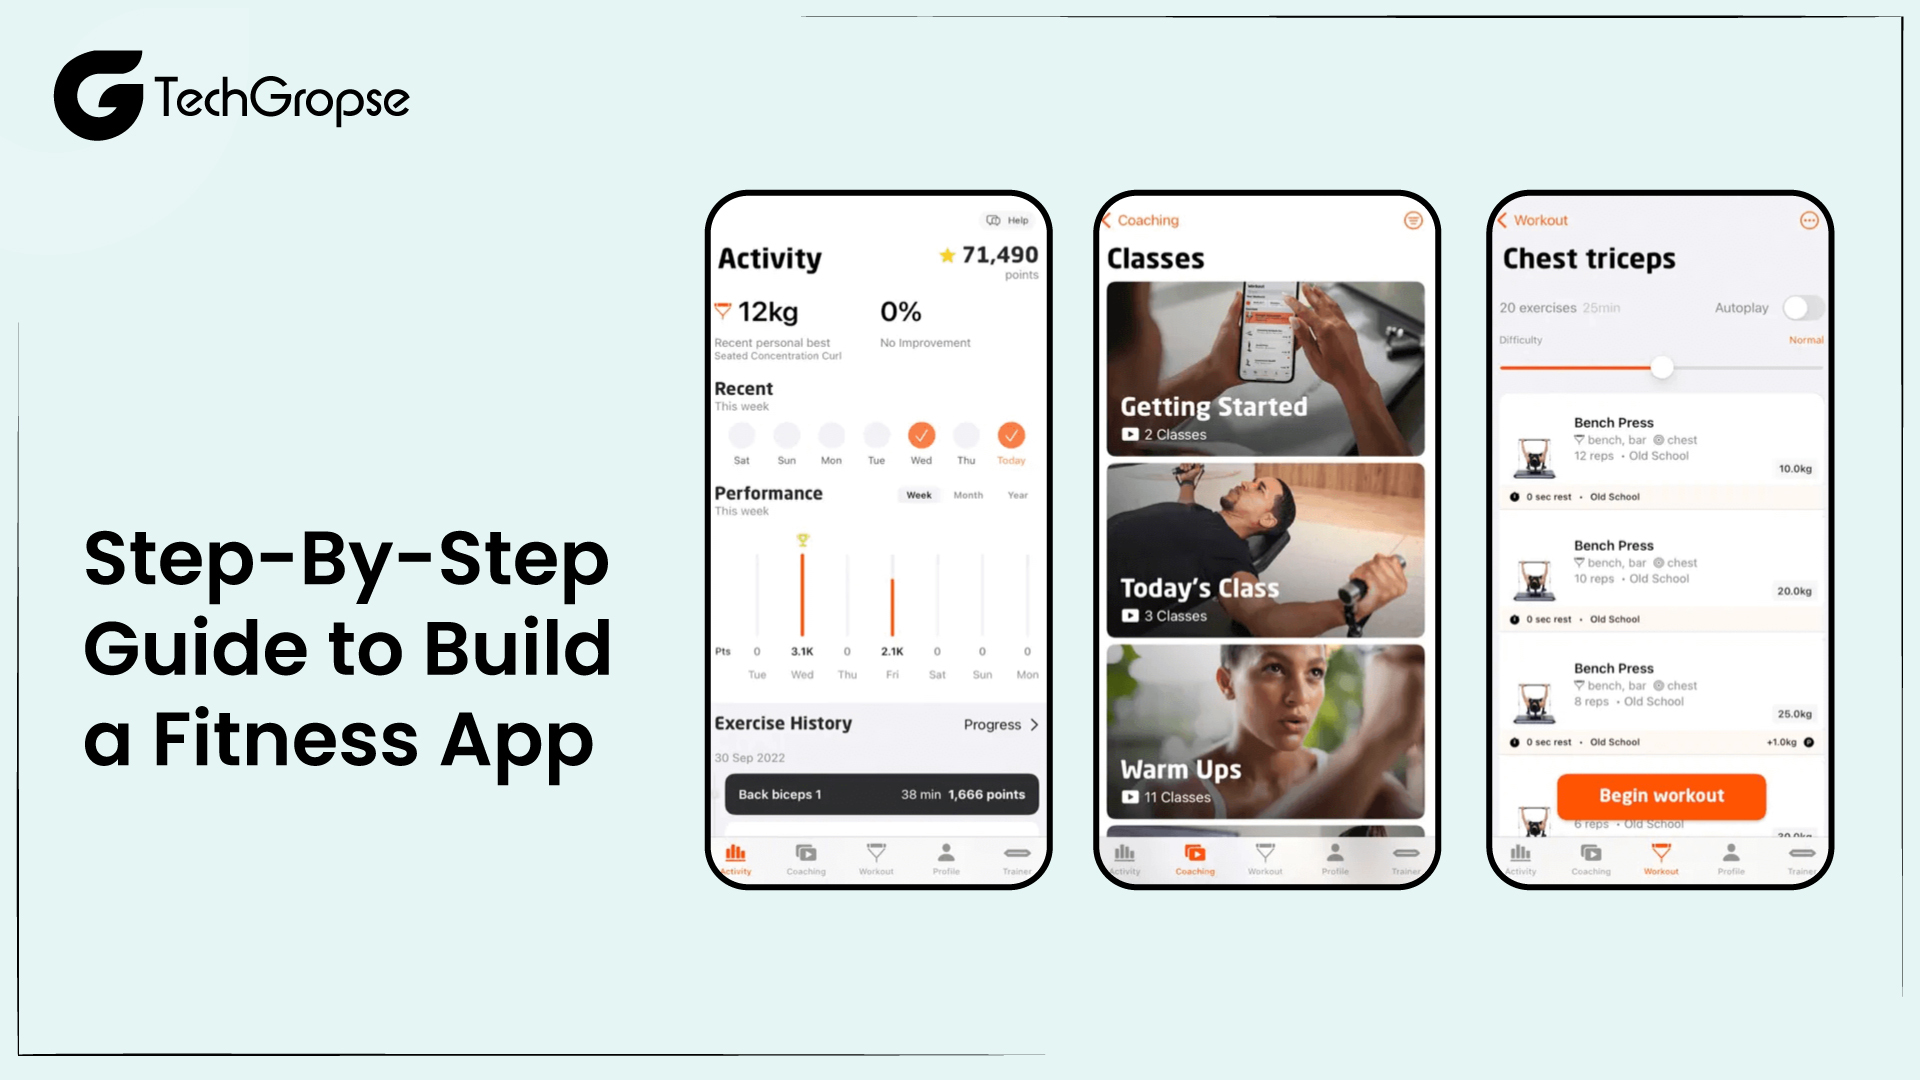 Step-By-Step Guide to Build a Fitness App